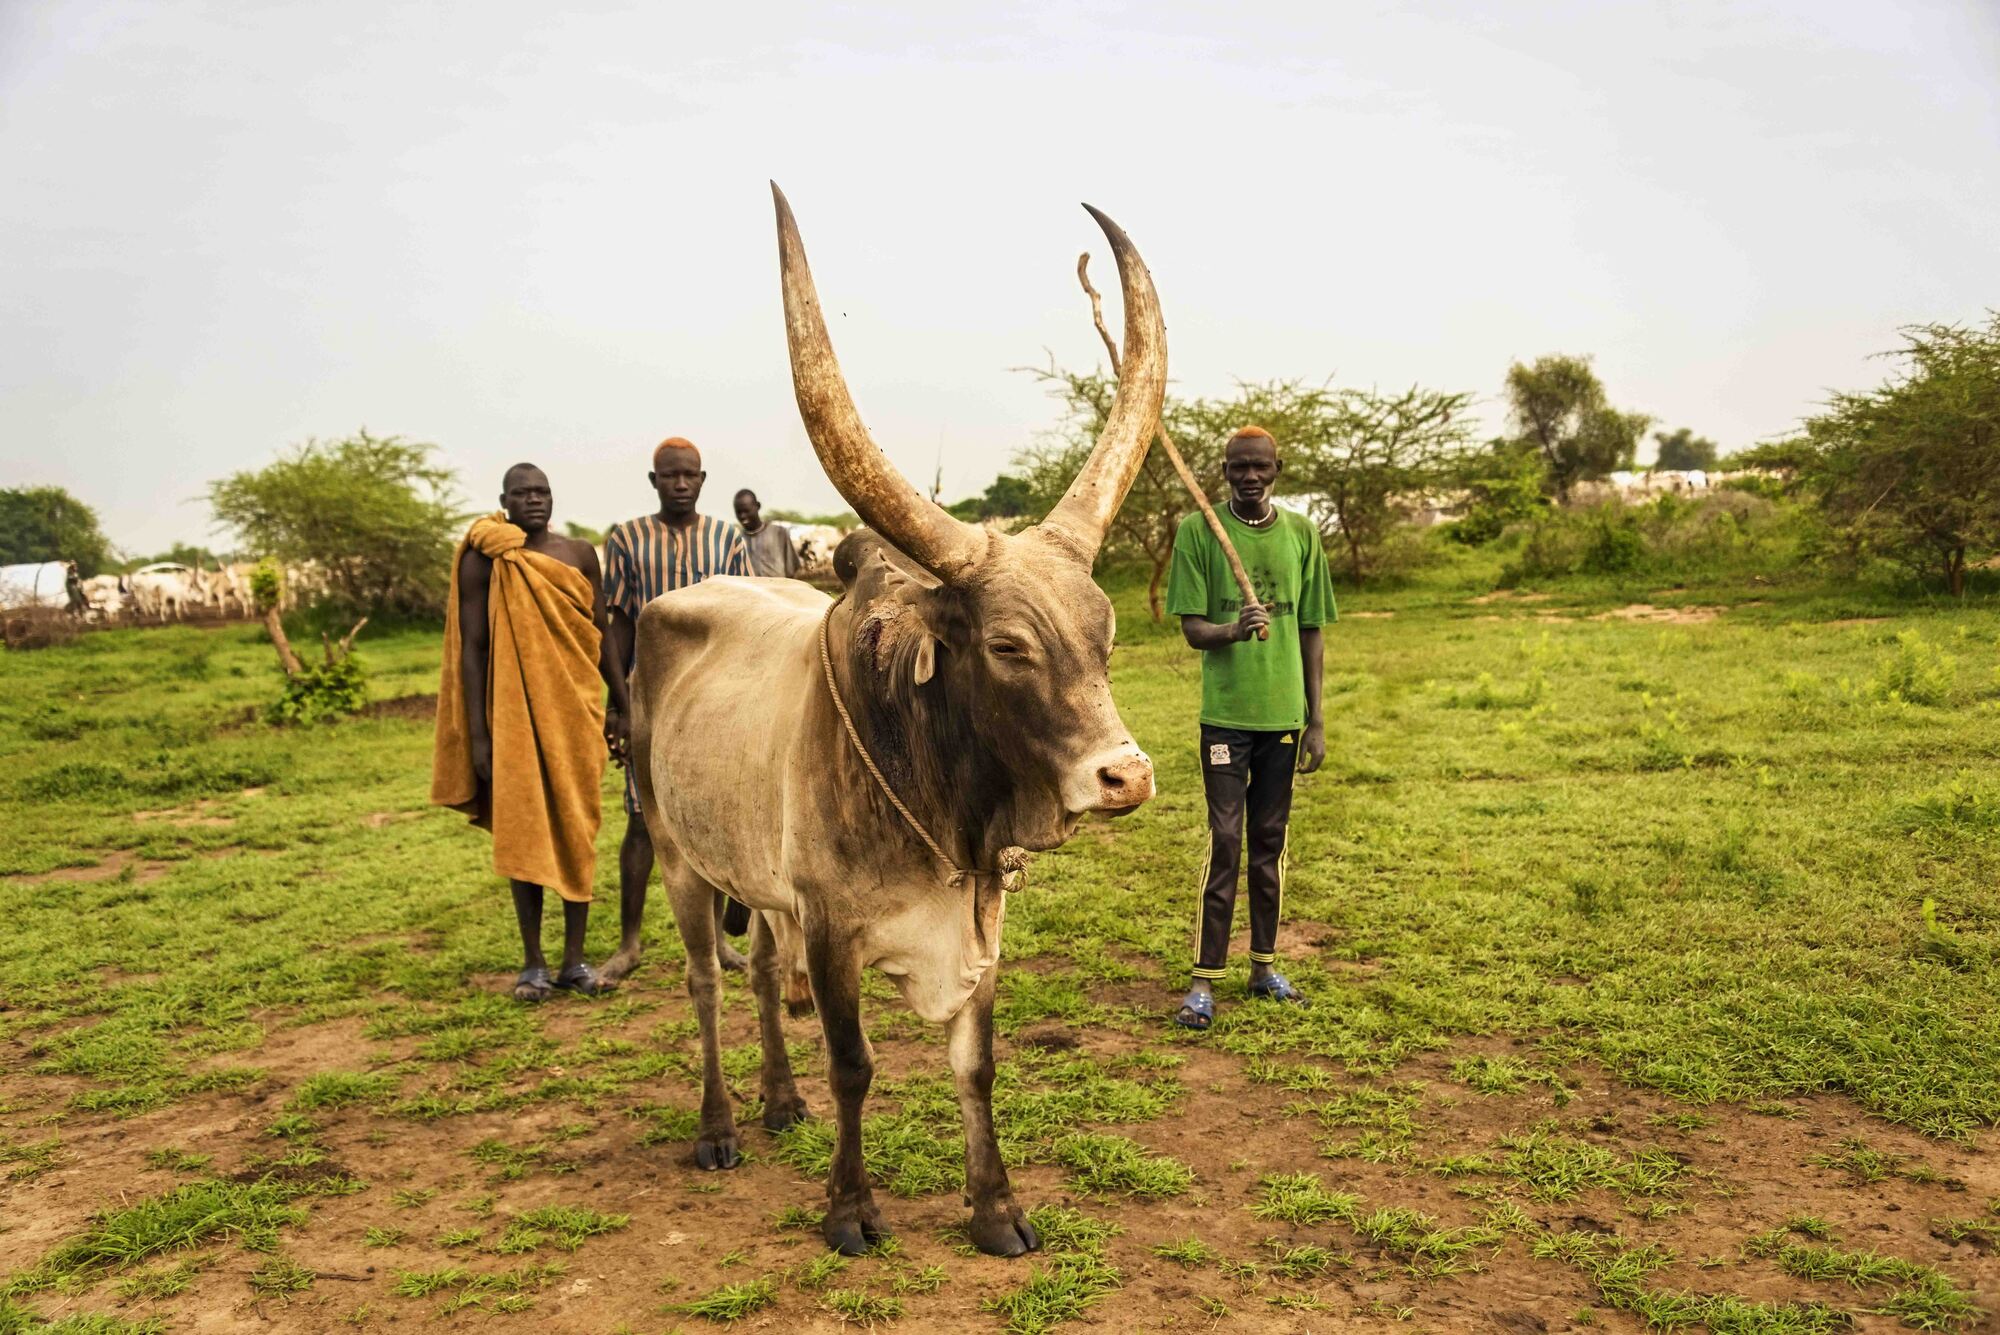 Photograph of farmers with a cow in South Sudan, eastern Africa. The photo shows three men standing behind a large cow with long, slightly curving, upright corns. The man standing to the right of the cow holds a long stick. Another man stands in the background, and a herd of cows stands even further in the background.